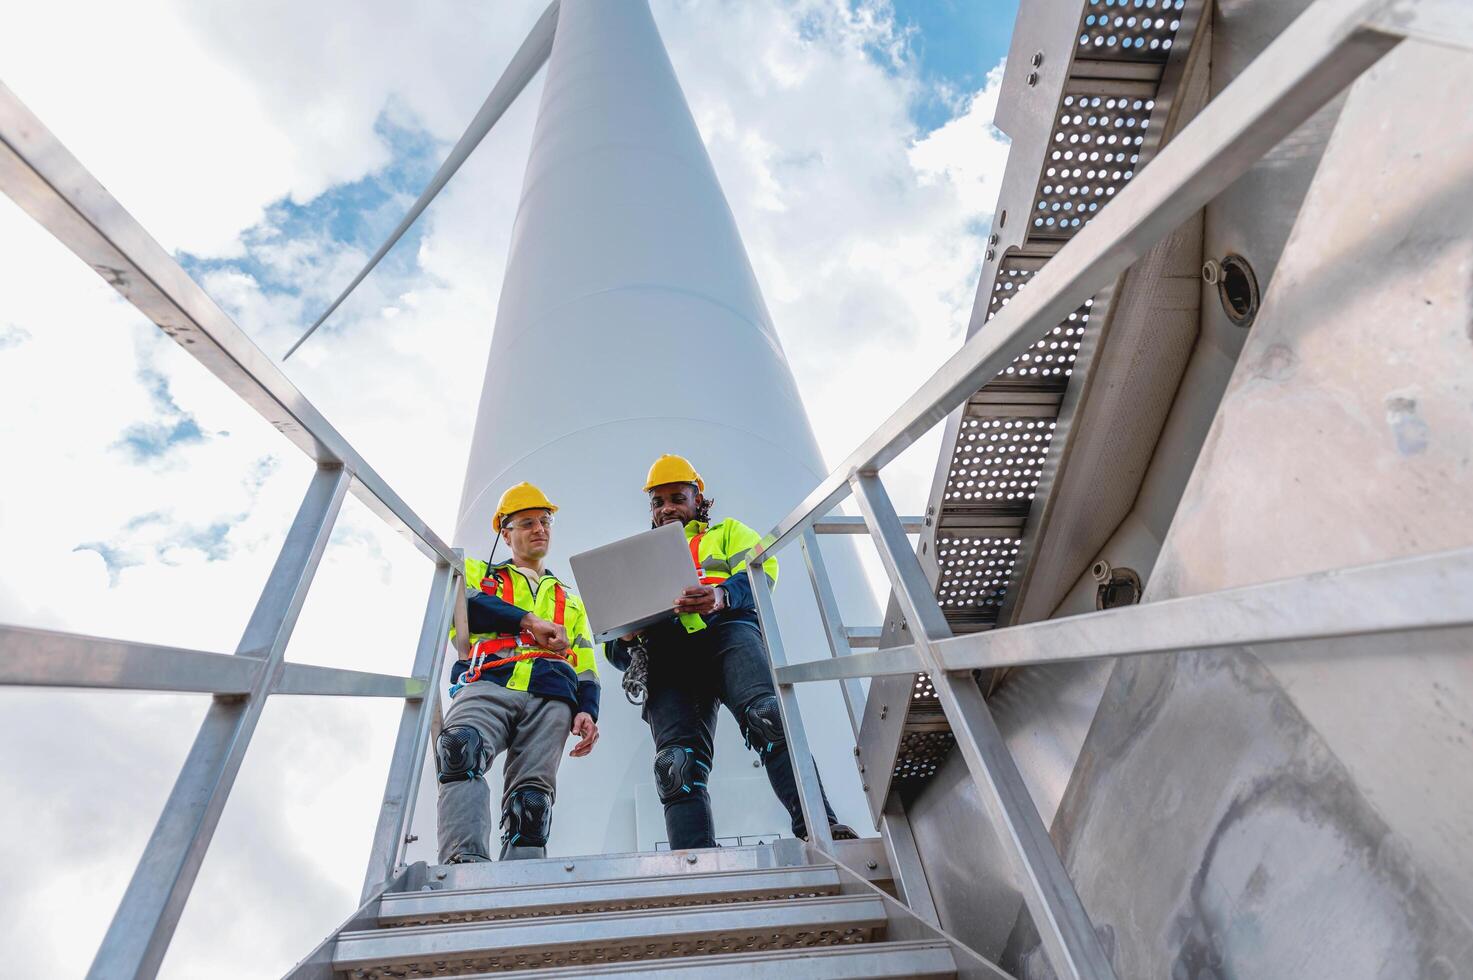 two men in safety gear are standing on a ladder next to a large wind turbine photo